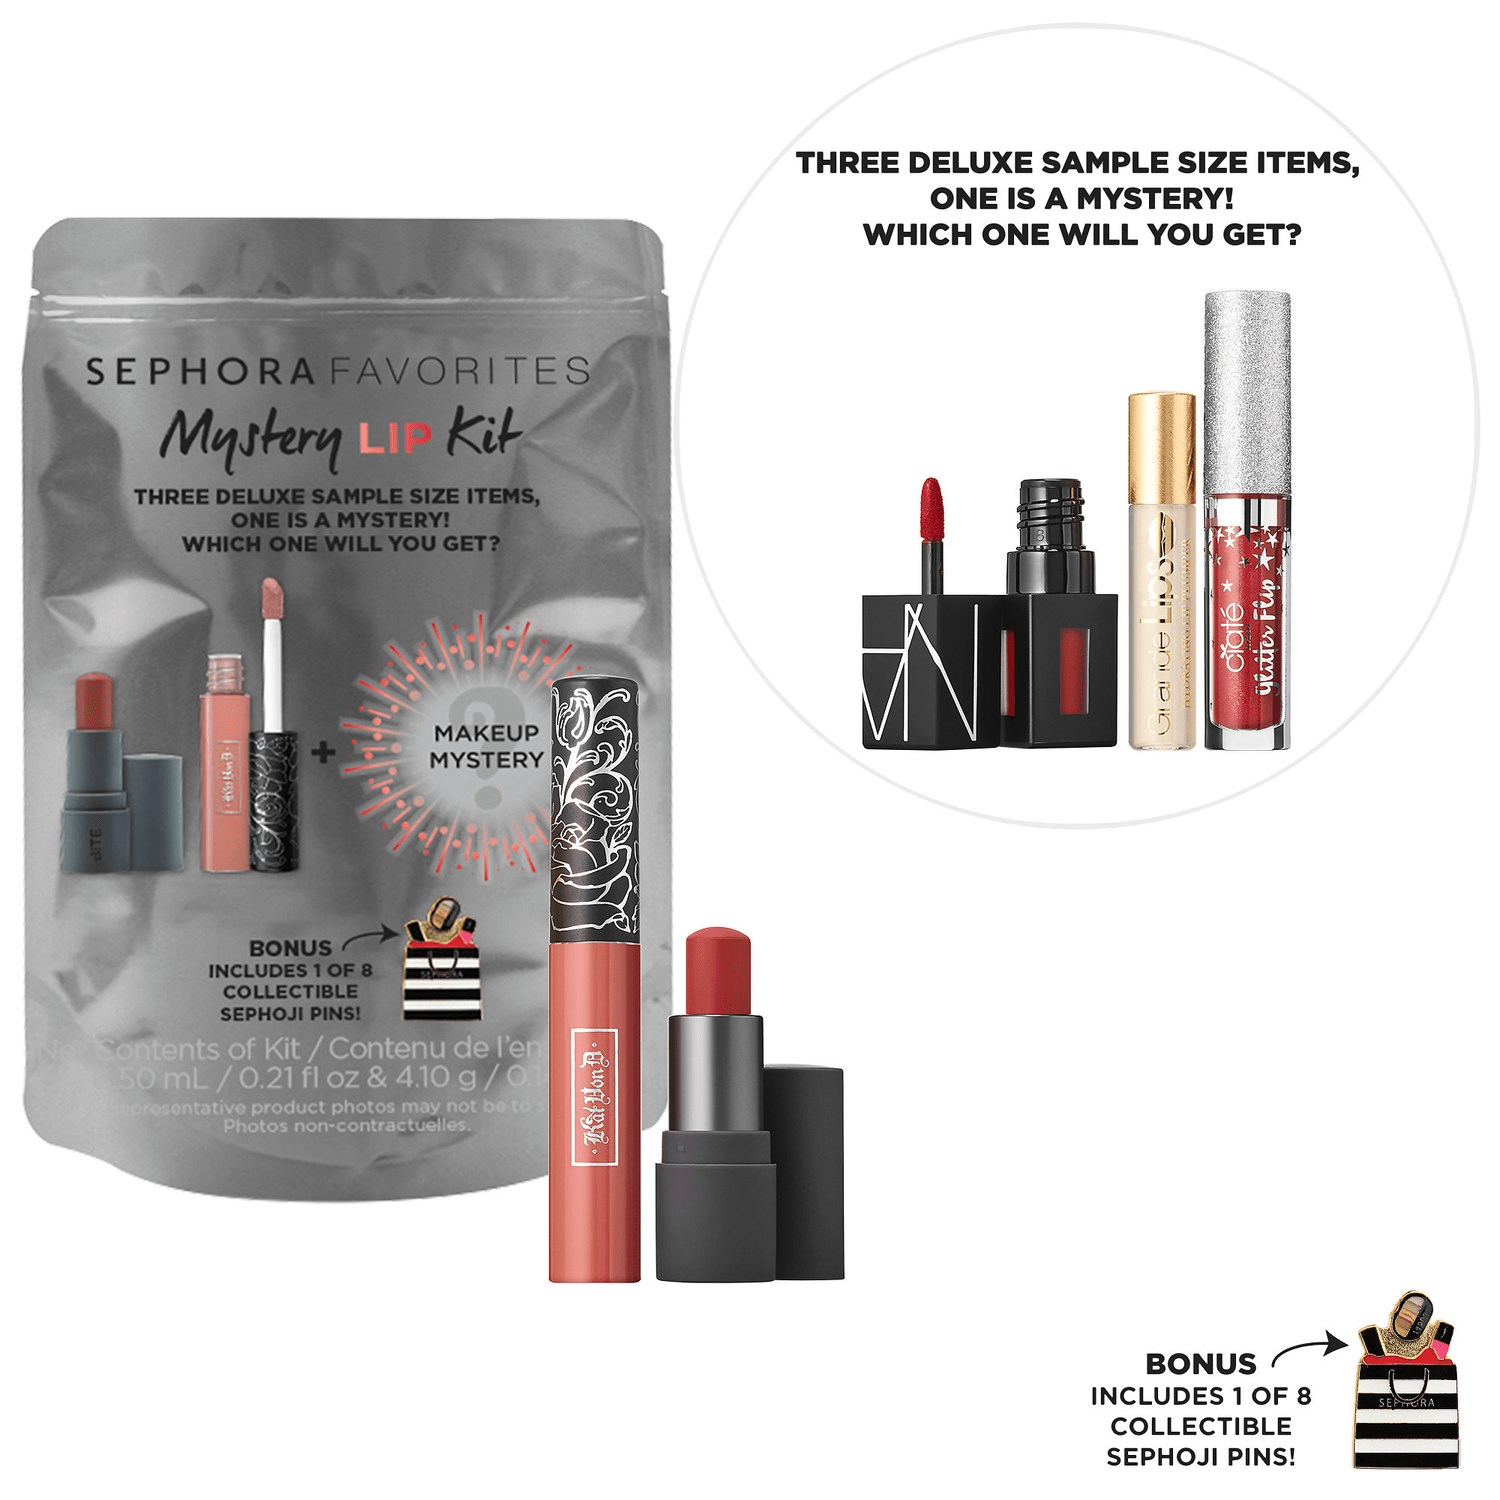 New Sephora Favorites Kits Available Now! hello subscription